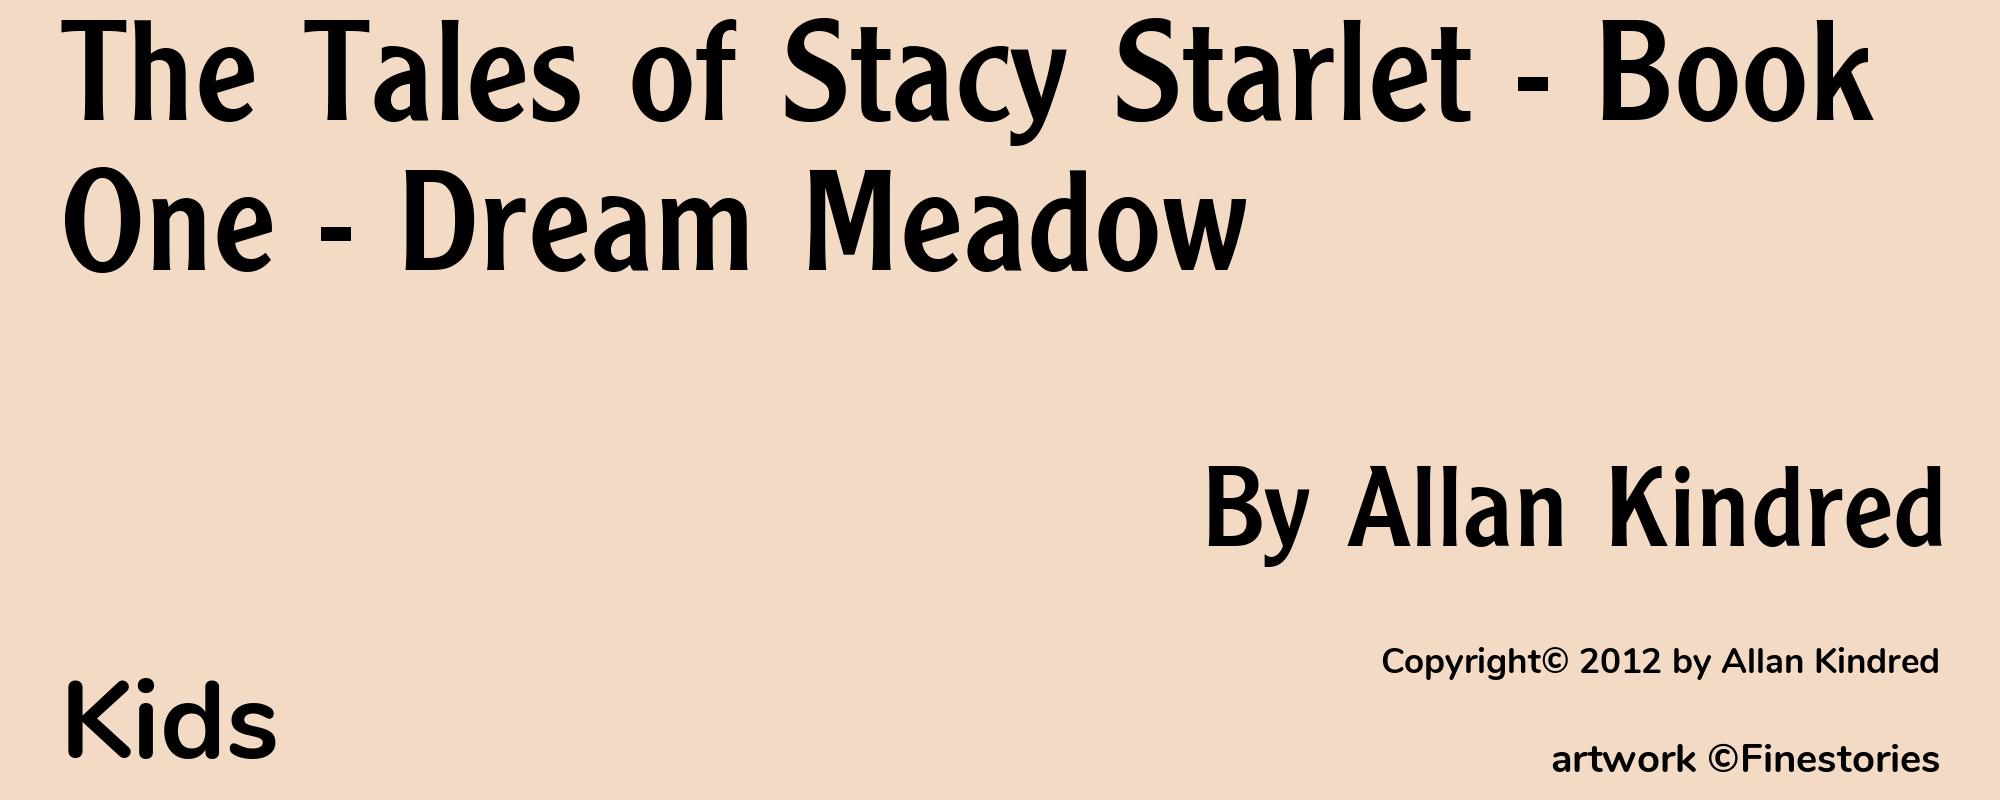 The Tales of Stacy Starlet - Book One - Dream Meadow - Cover